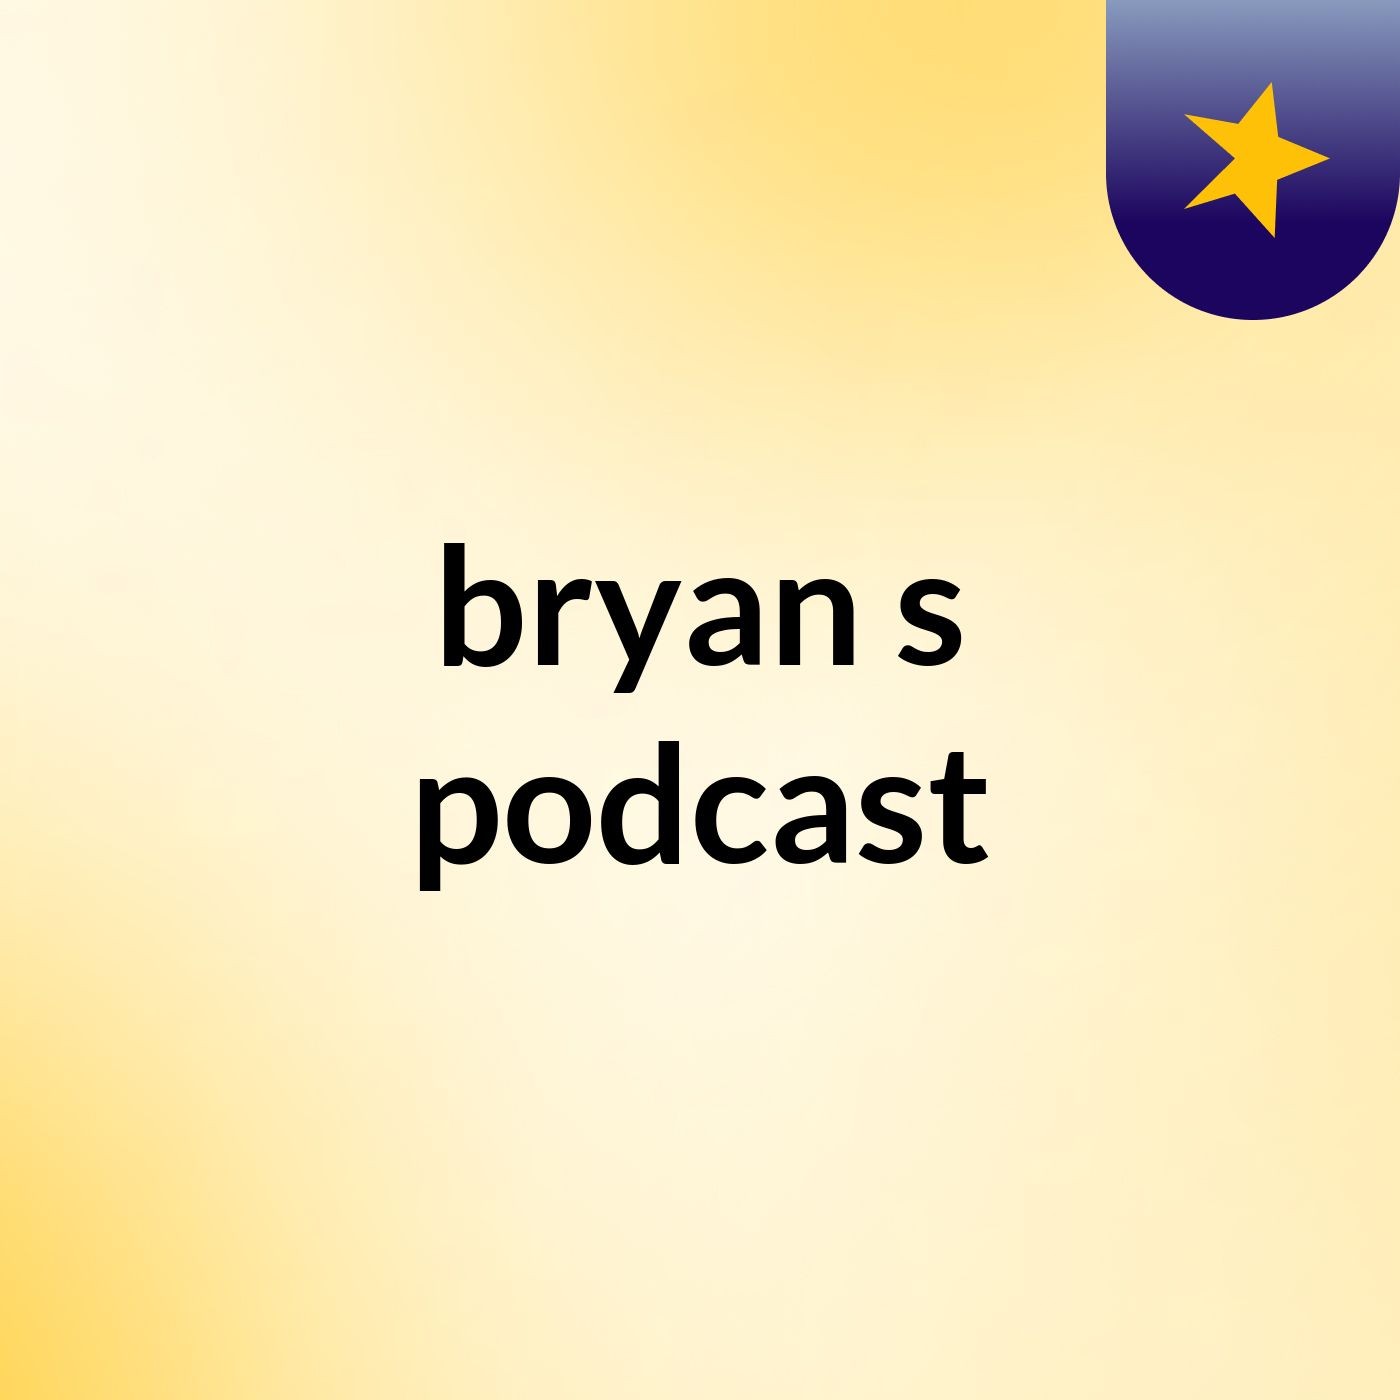 Bryan's fantastic podcast with special guest Rachel stupid head